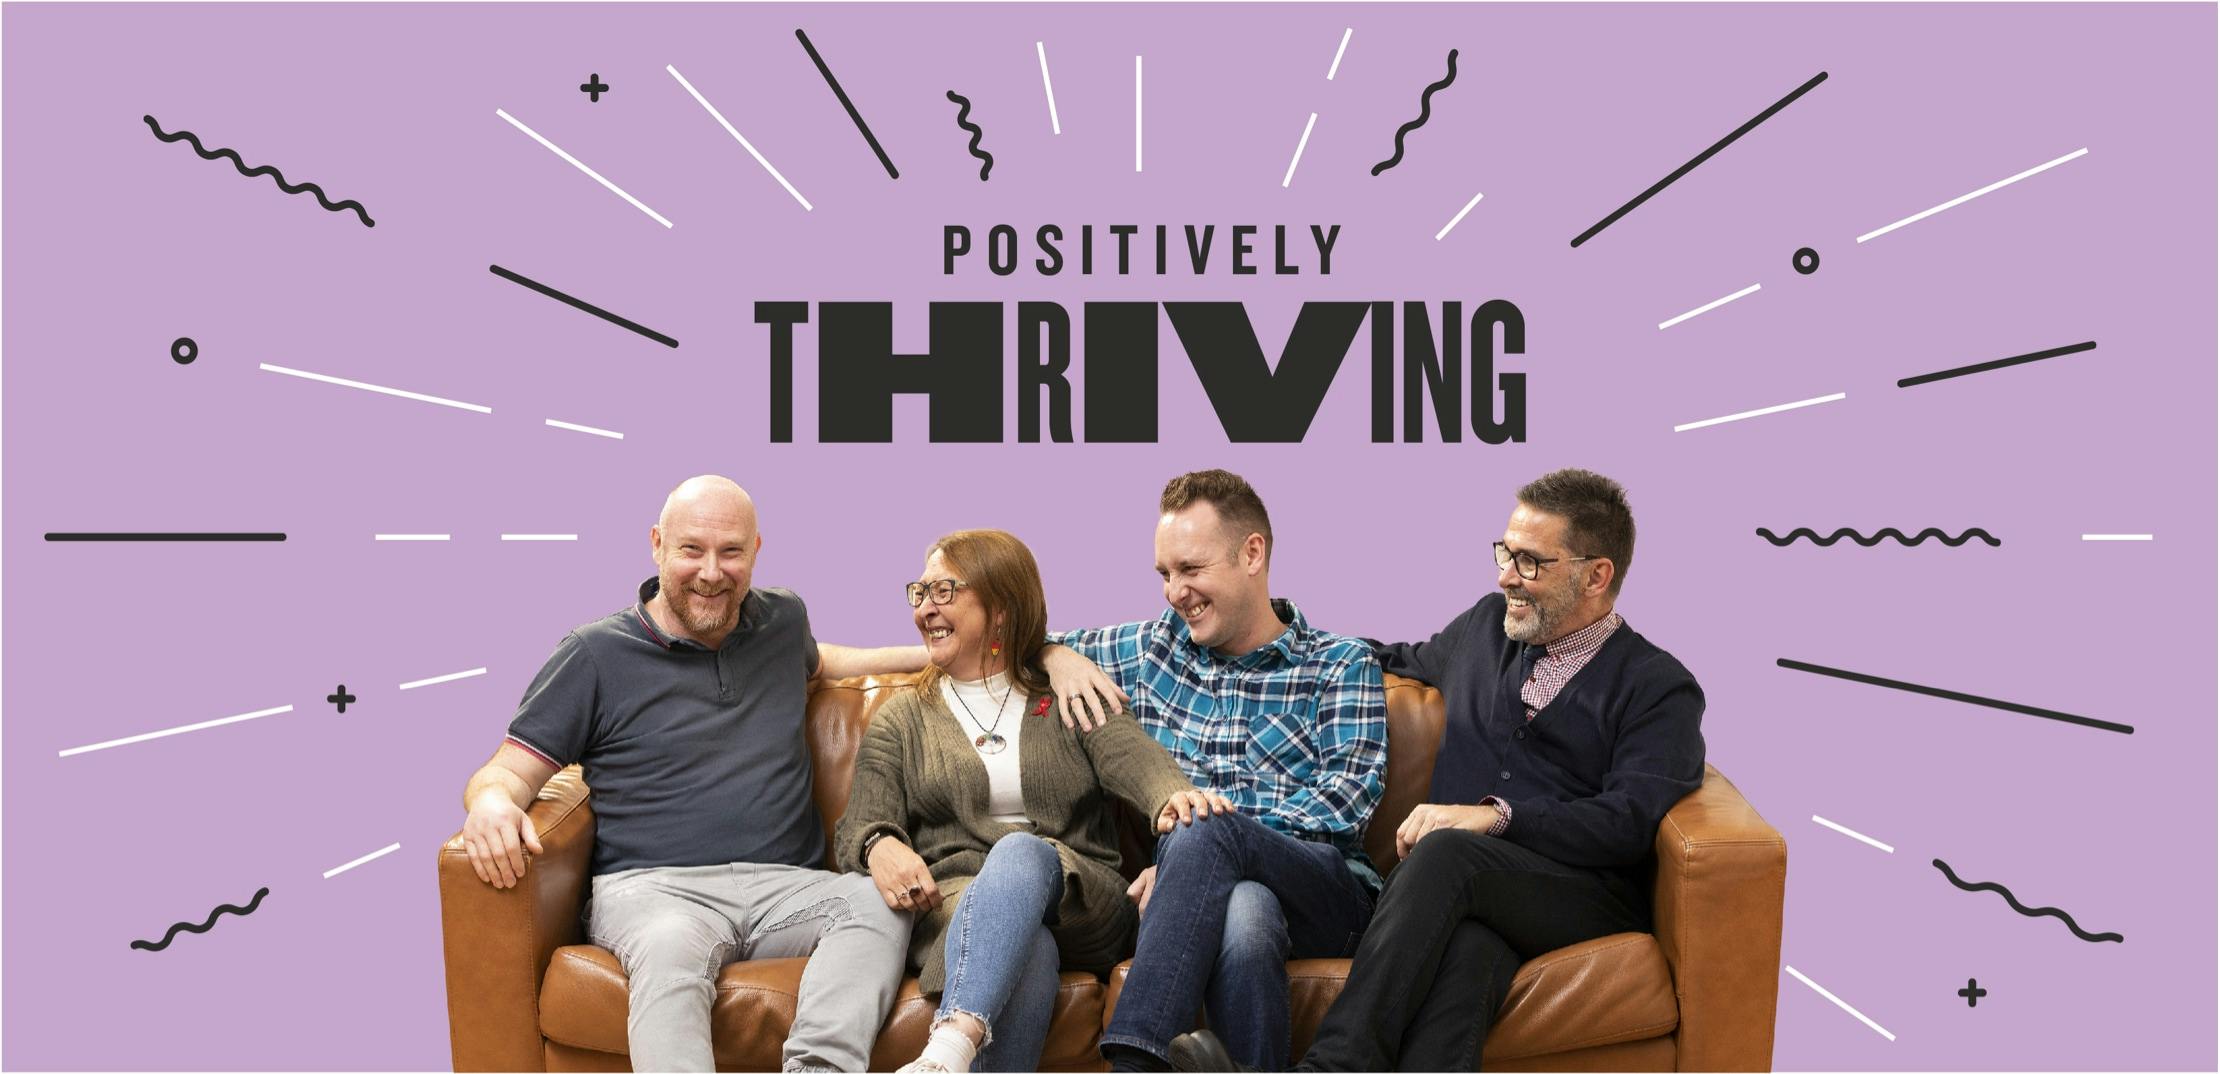 The four hosts of Positively Thriving Podcast pose as a group on a street